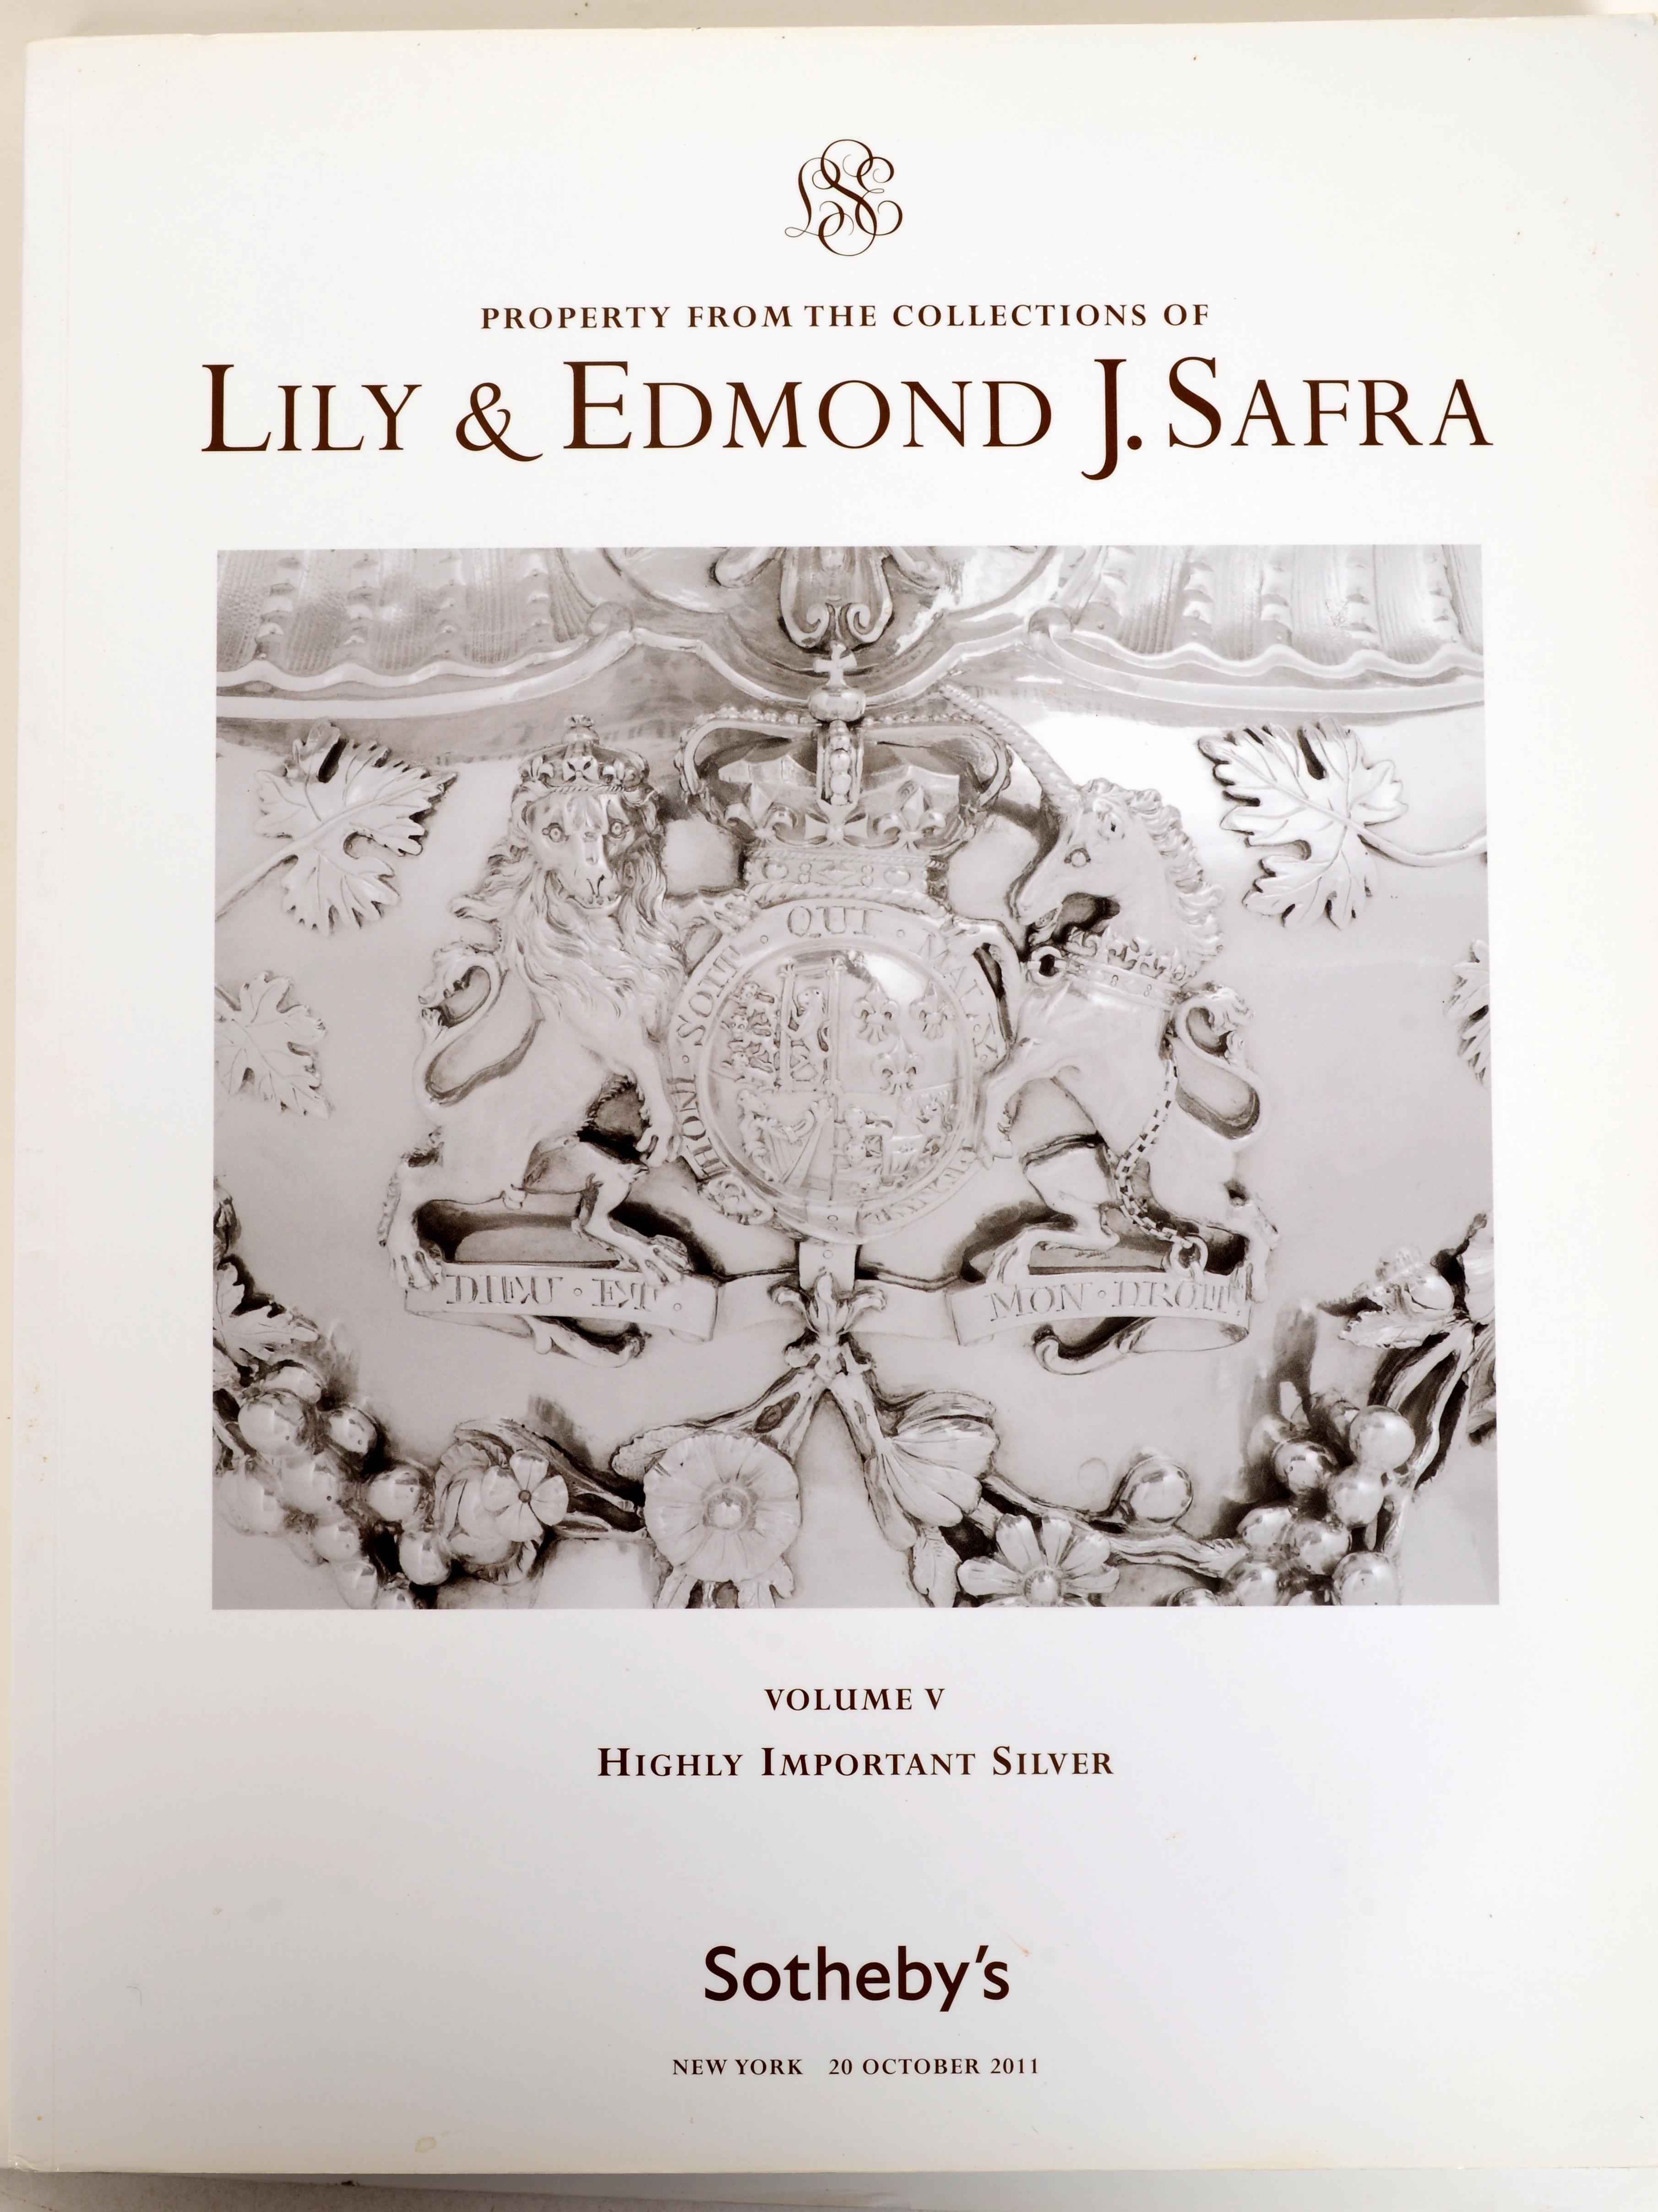 American Sotheby's: Property from the Collections of Lily & Edmond J. Safra, 6 Volume Set For Sale